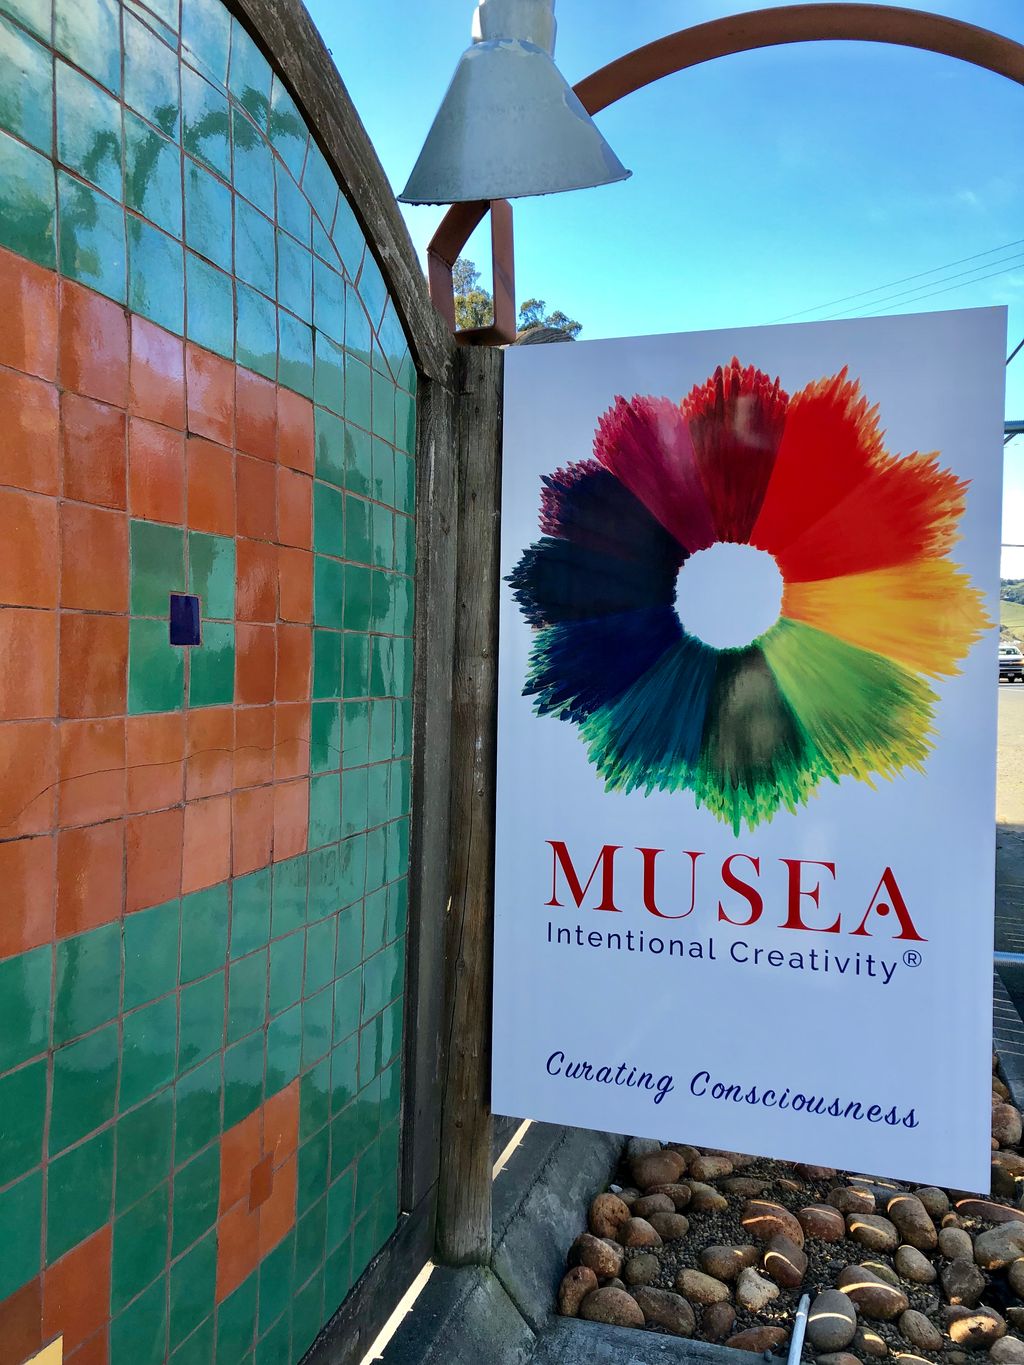 Musea Center for Intentional Creativity